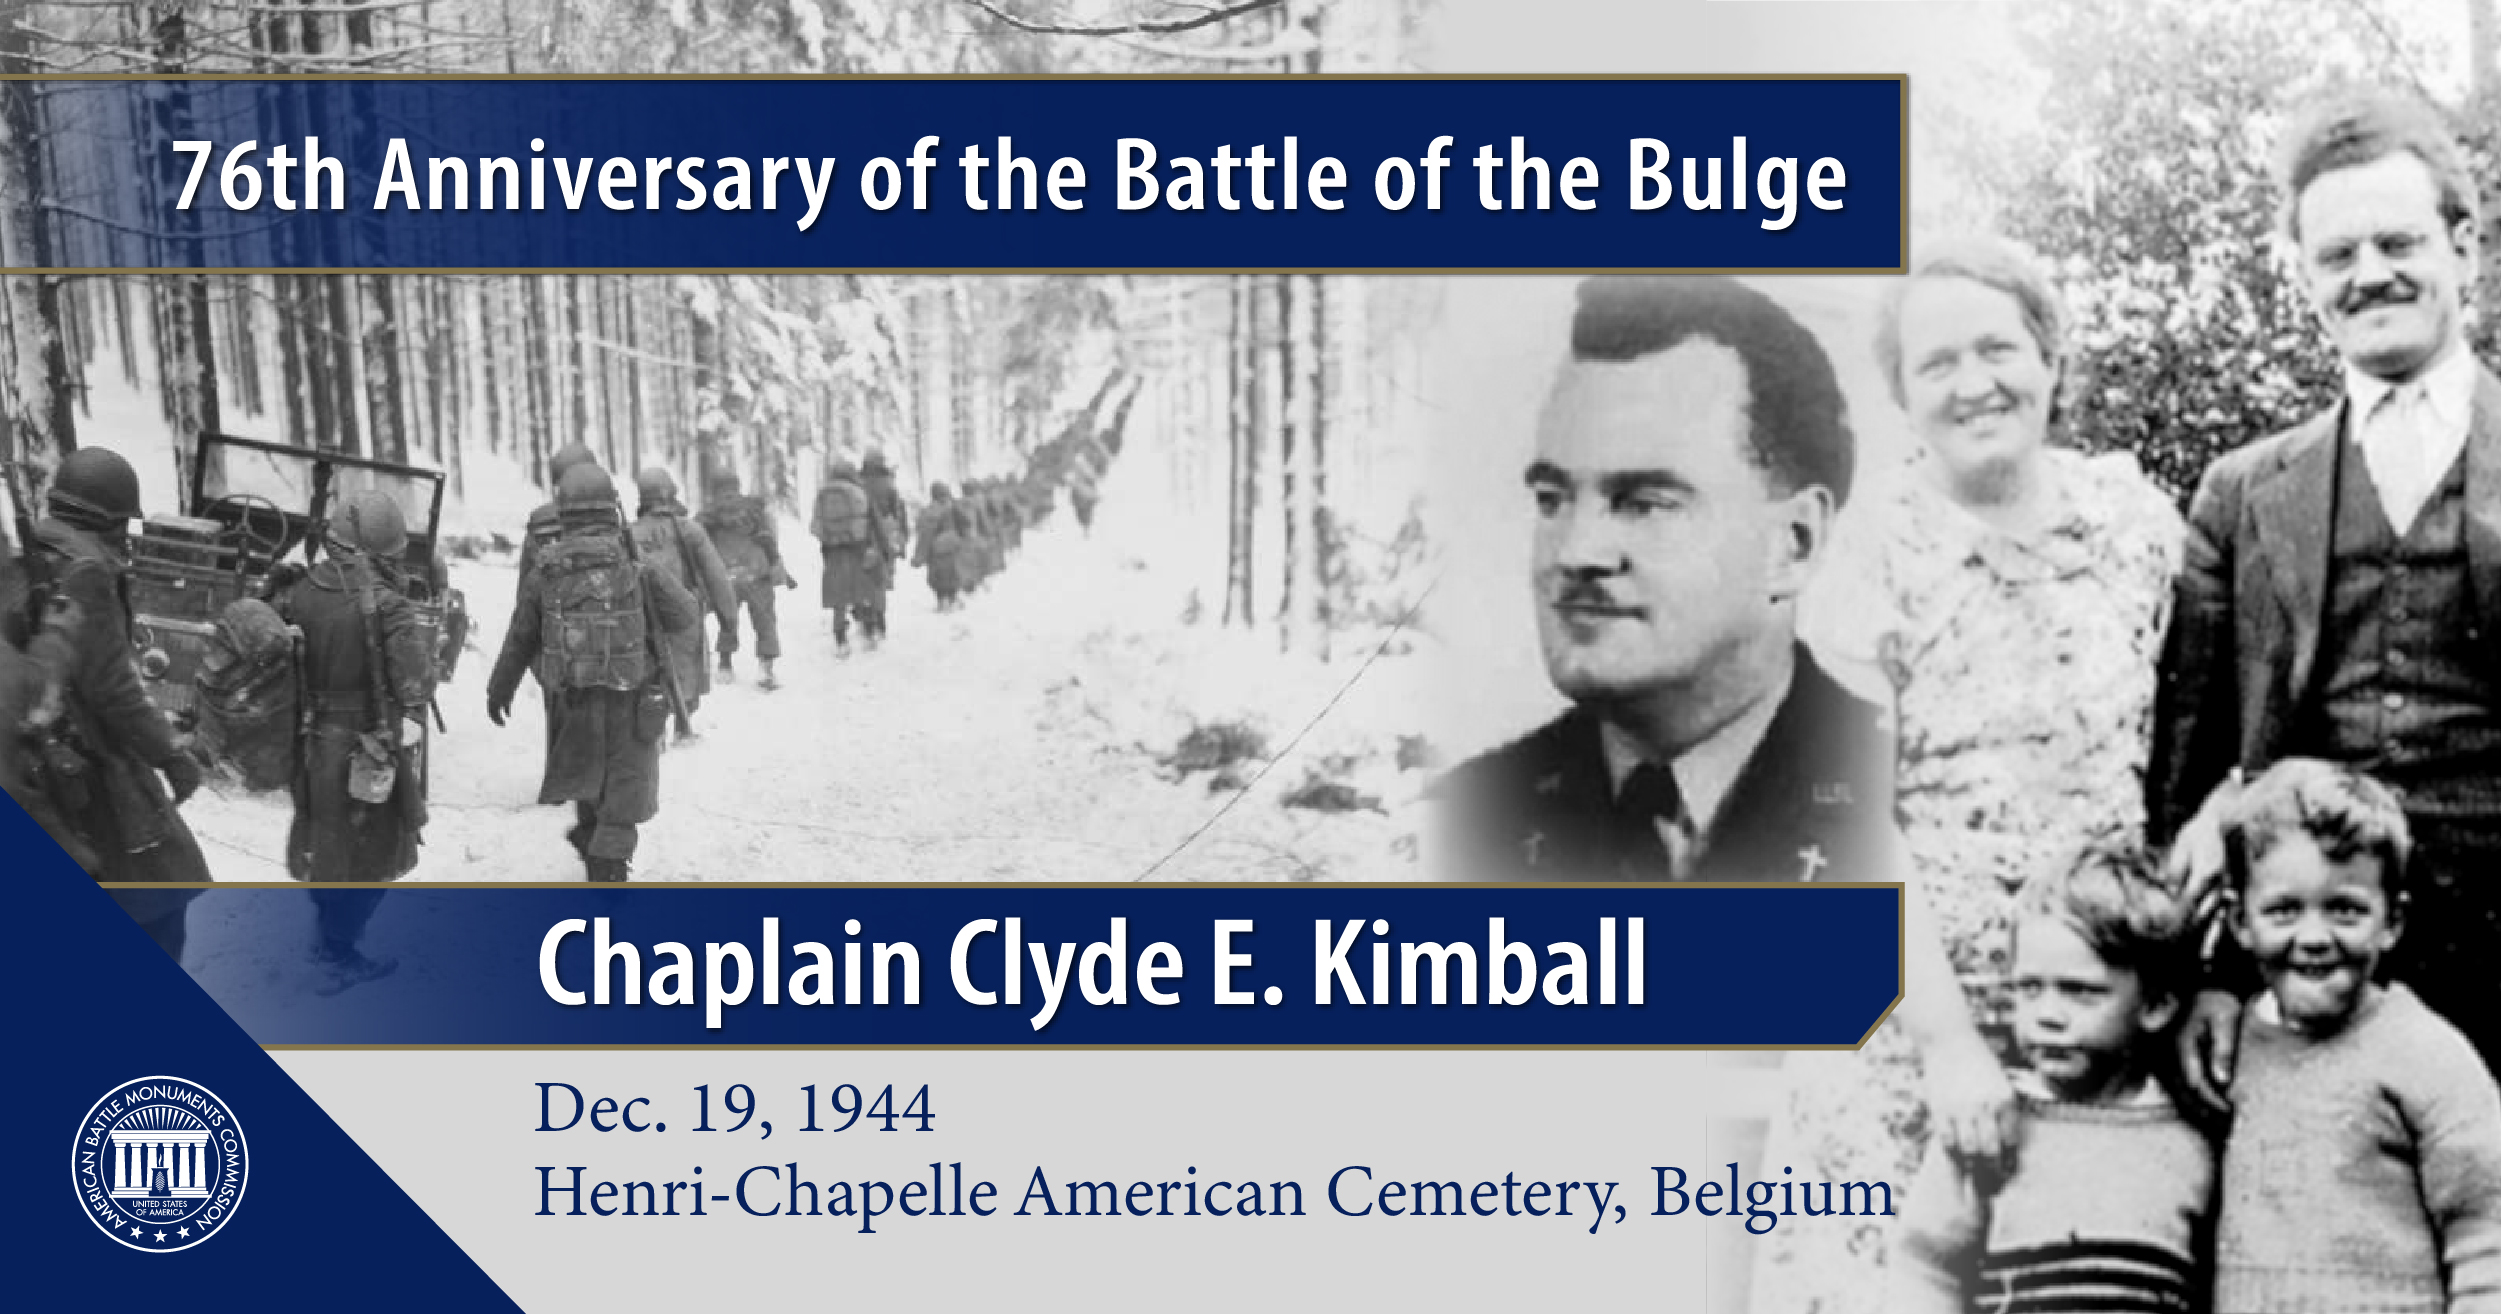 Chaplain Clyde E. Kimball, buried at Henri-Chapelle American Cemetery